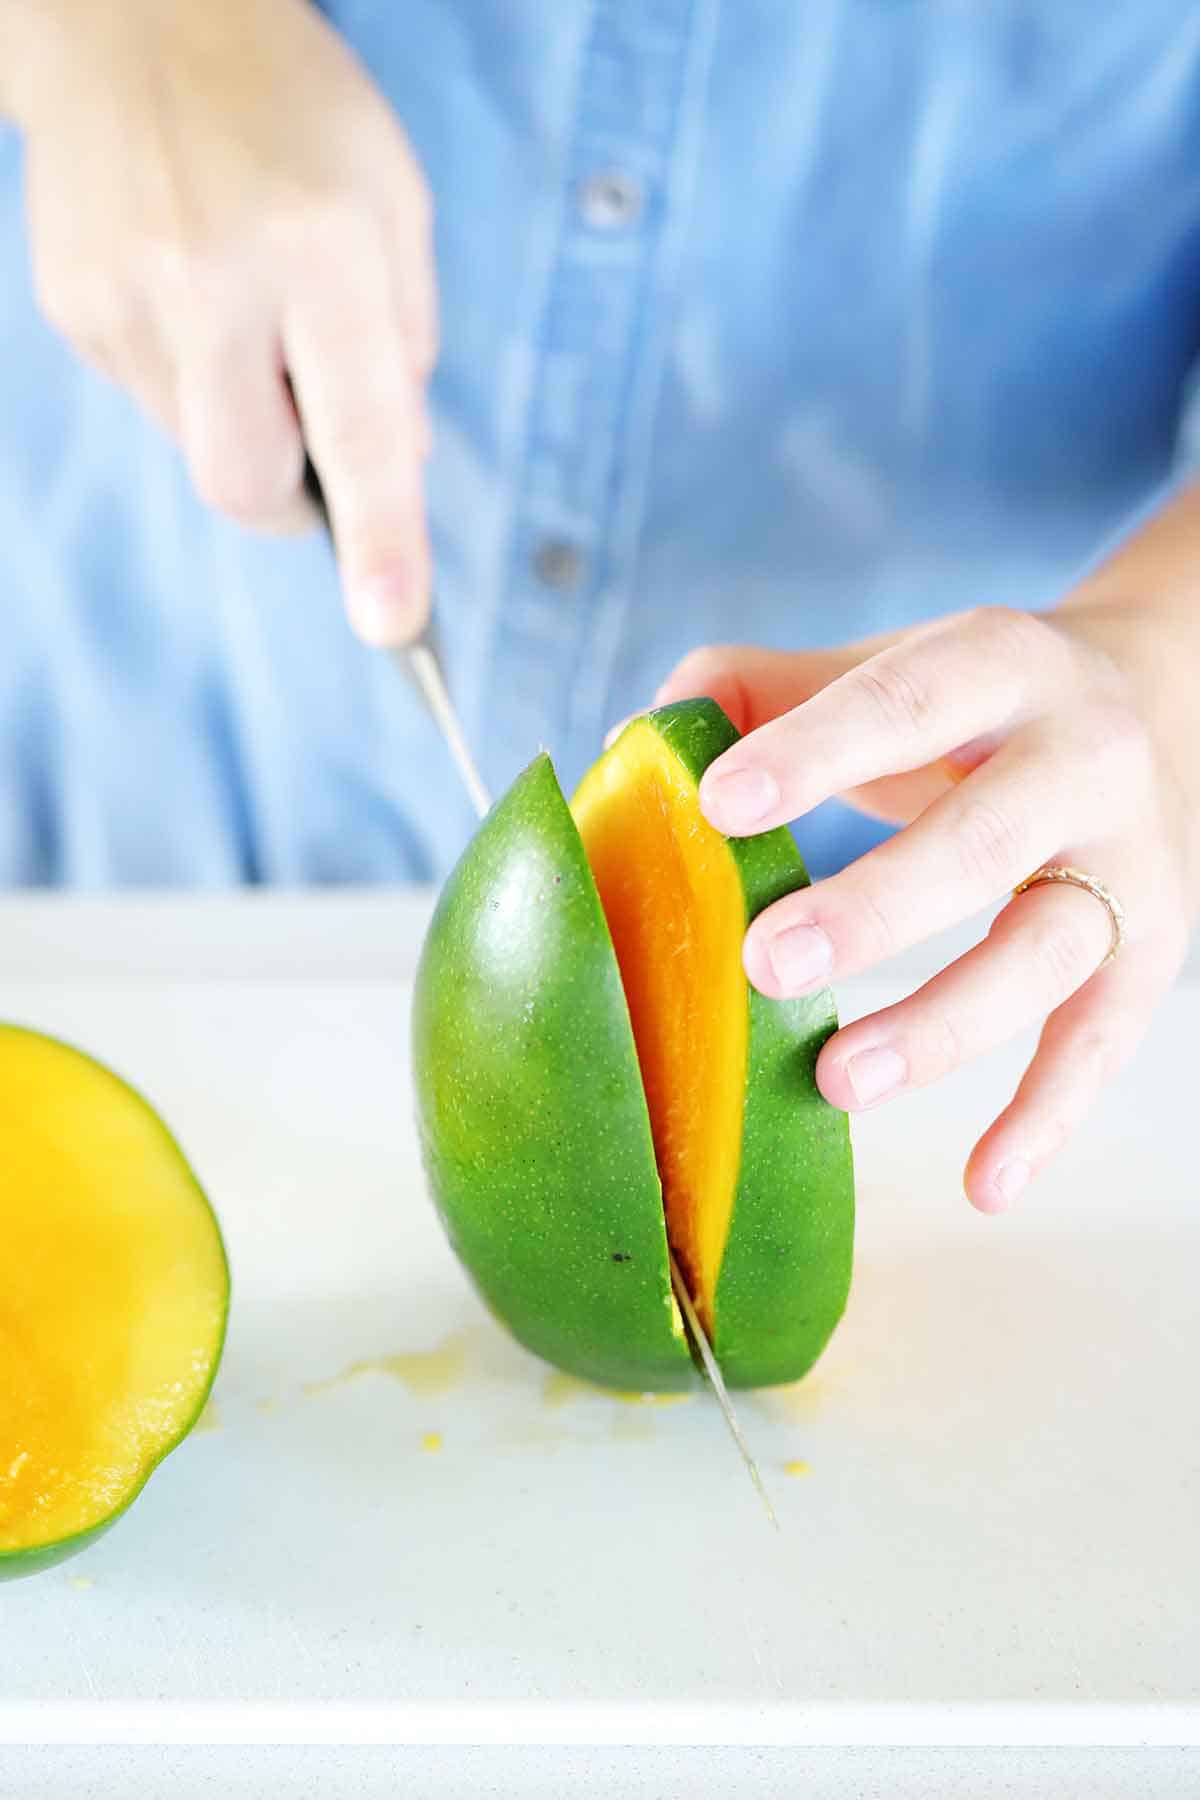 Slicing the sides off a mango